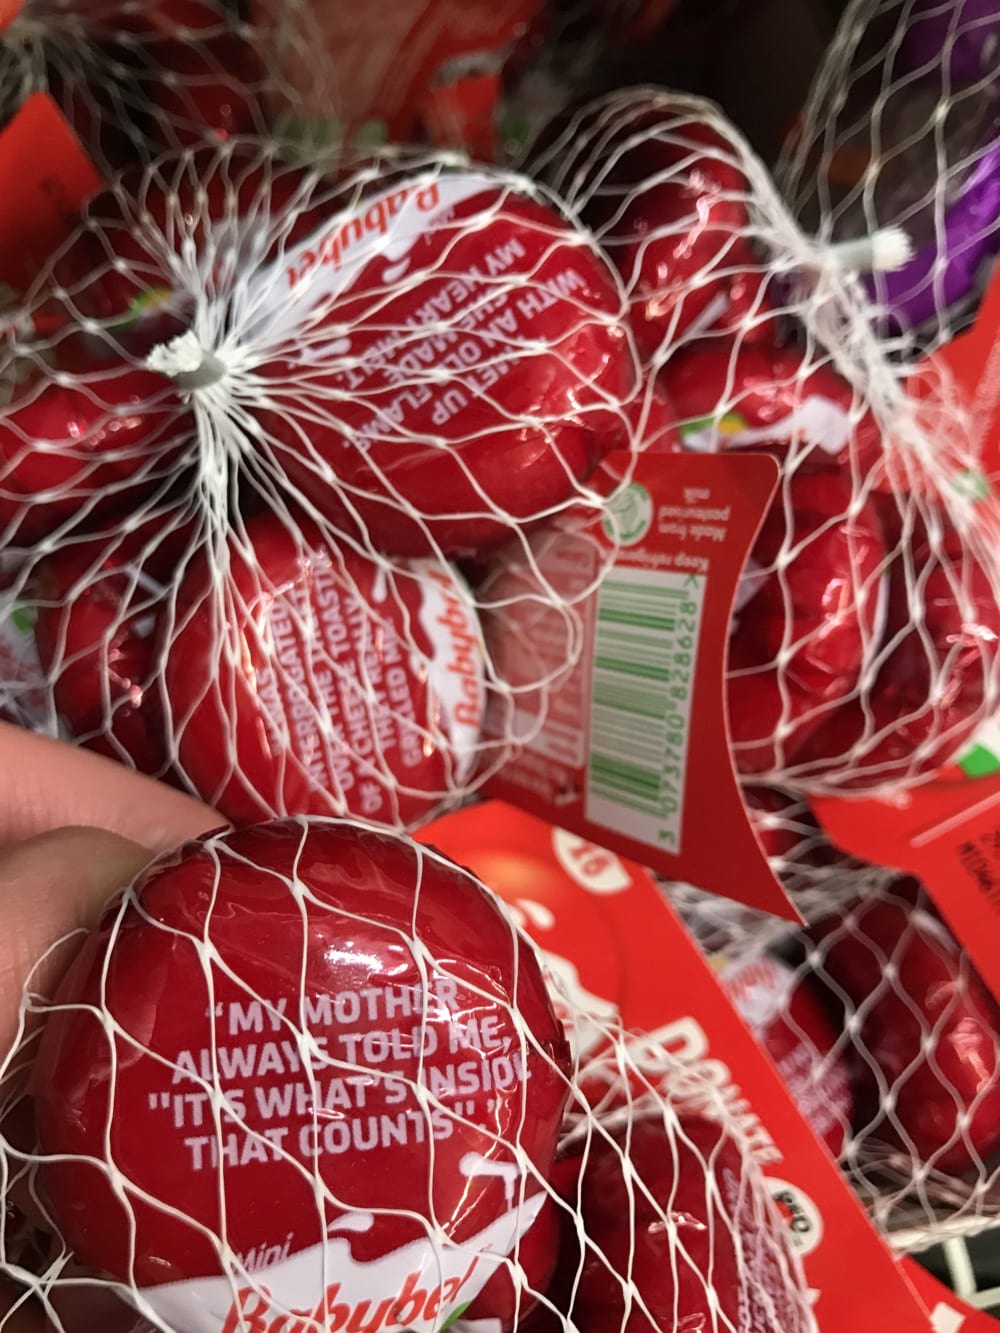 My Mother Always Told Me It's What Inside That Counts - Mini BabyBel Comic Relief Cheeses